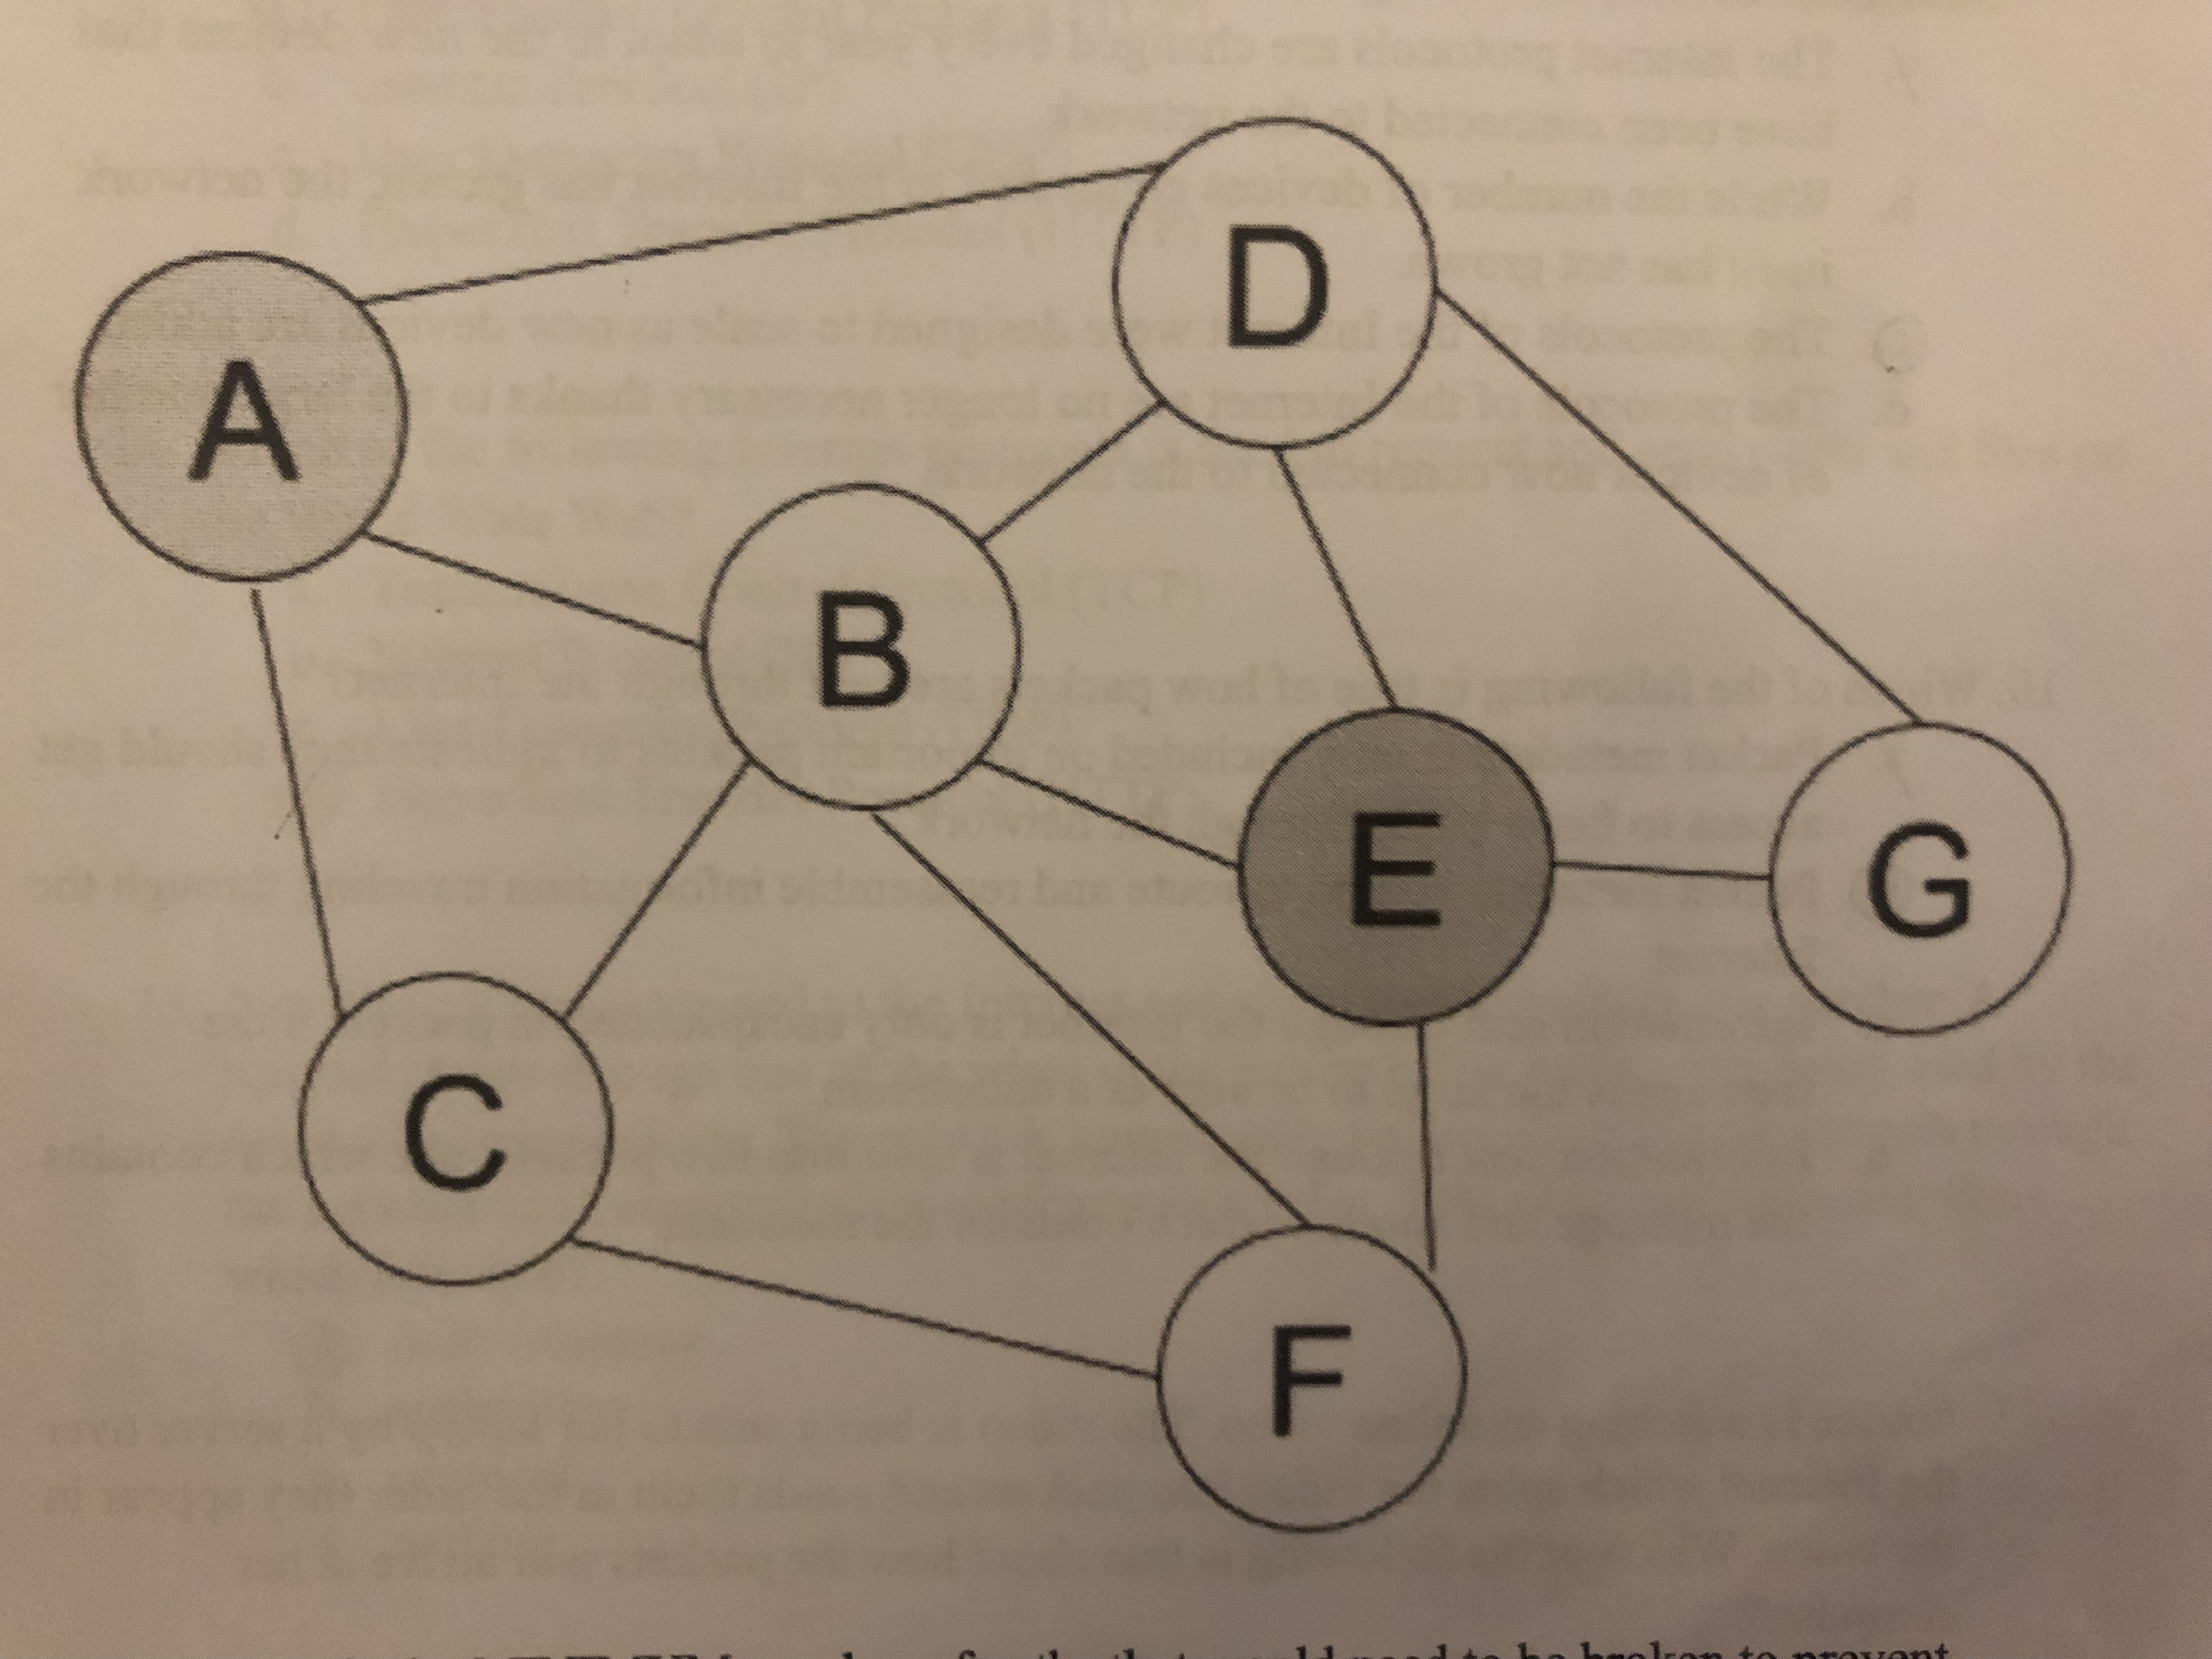 <p>What is the minimum number of paths that would need to be broken to prevent Computing Device A from connecting with Computing Device E?</p><p>A.) 1</p><p>B.) 2</p><p>C.) 3</p><p>D.) 4</p>